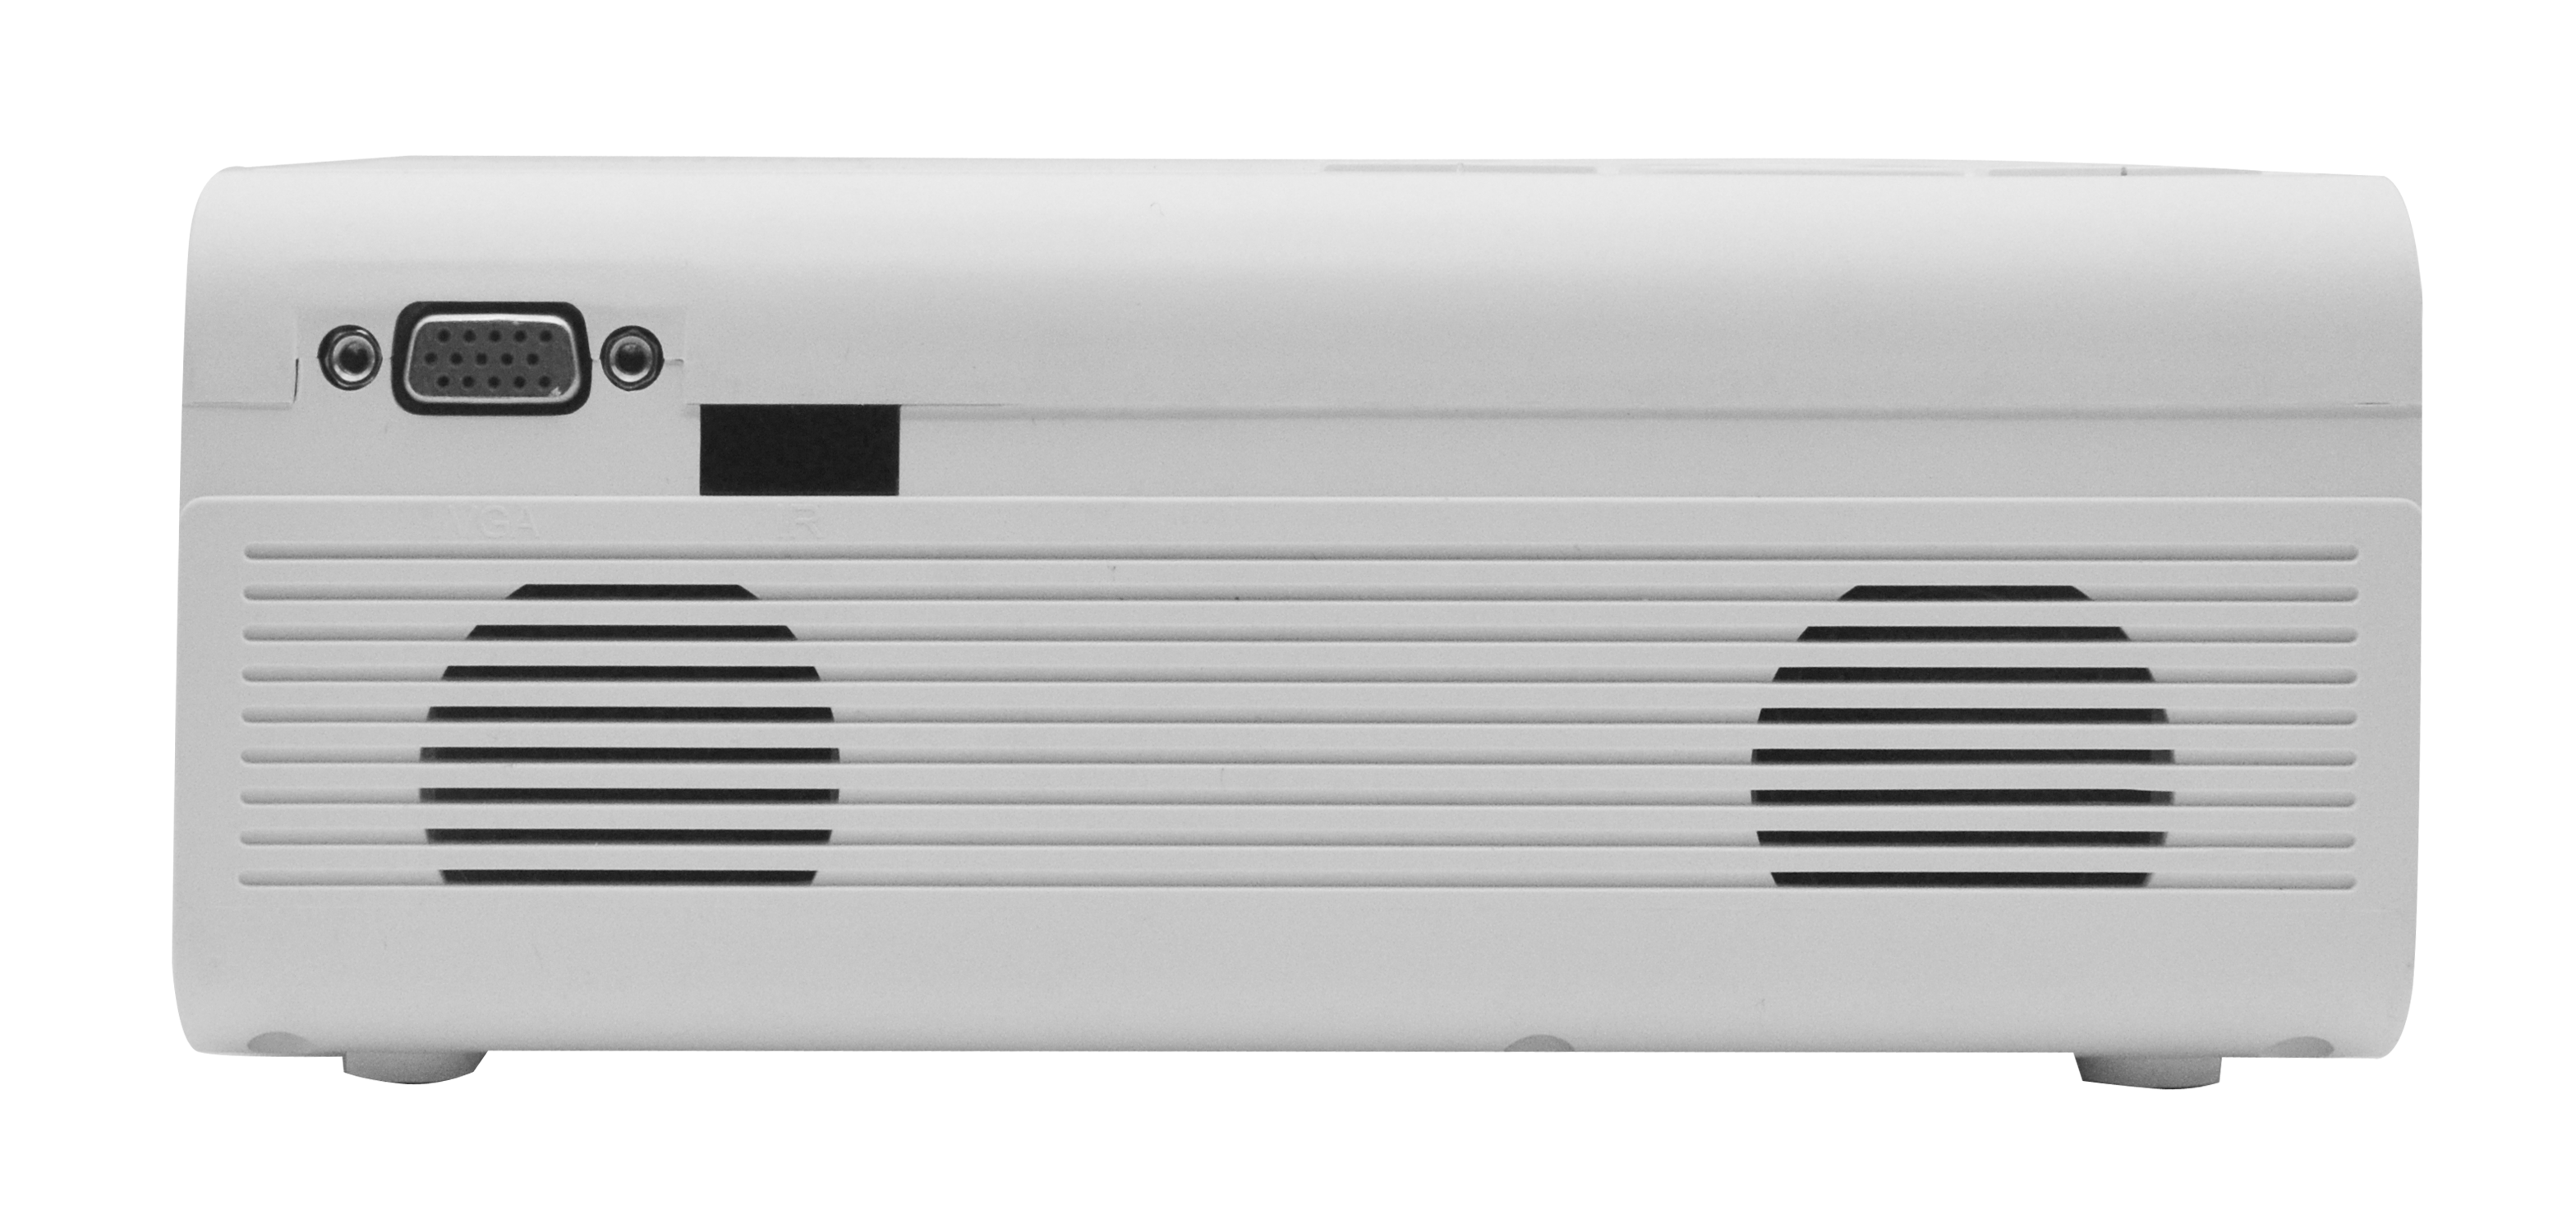 RCA RPJ119 Home Theater Projector - up to 150 Lumens 1080p Playback - image 2 of 7